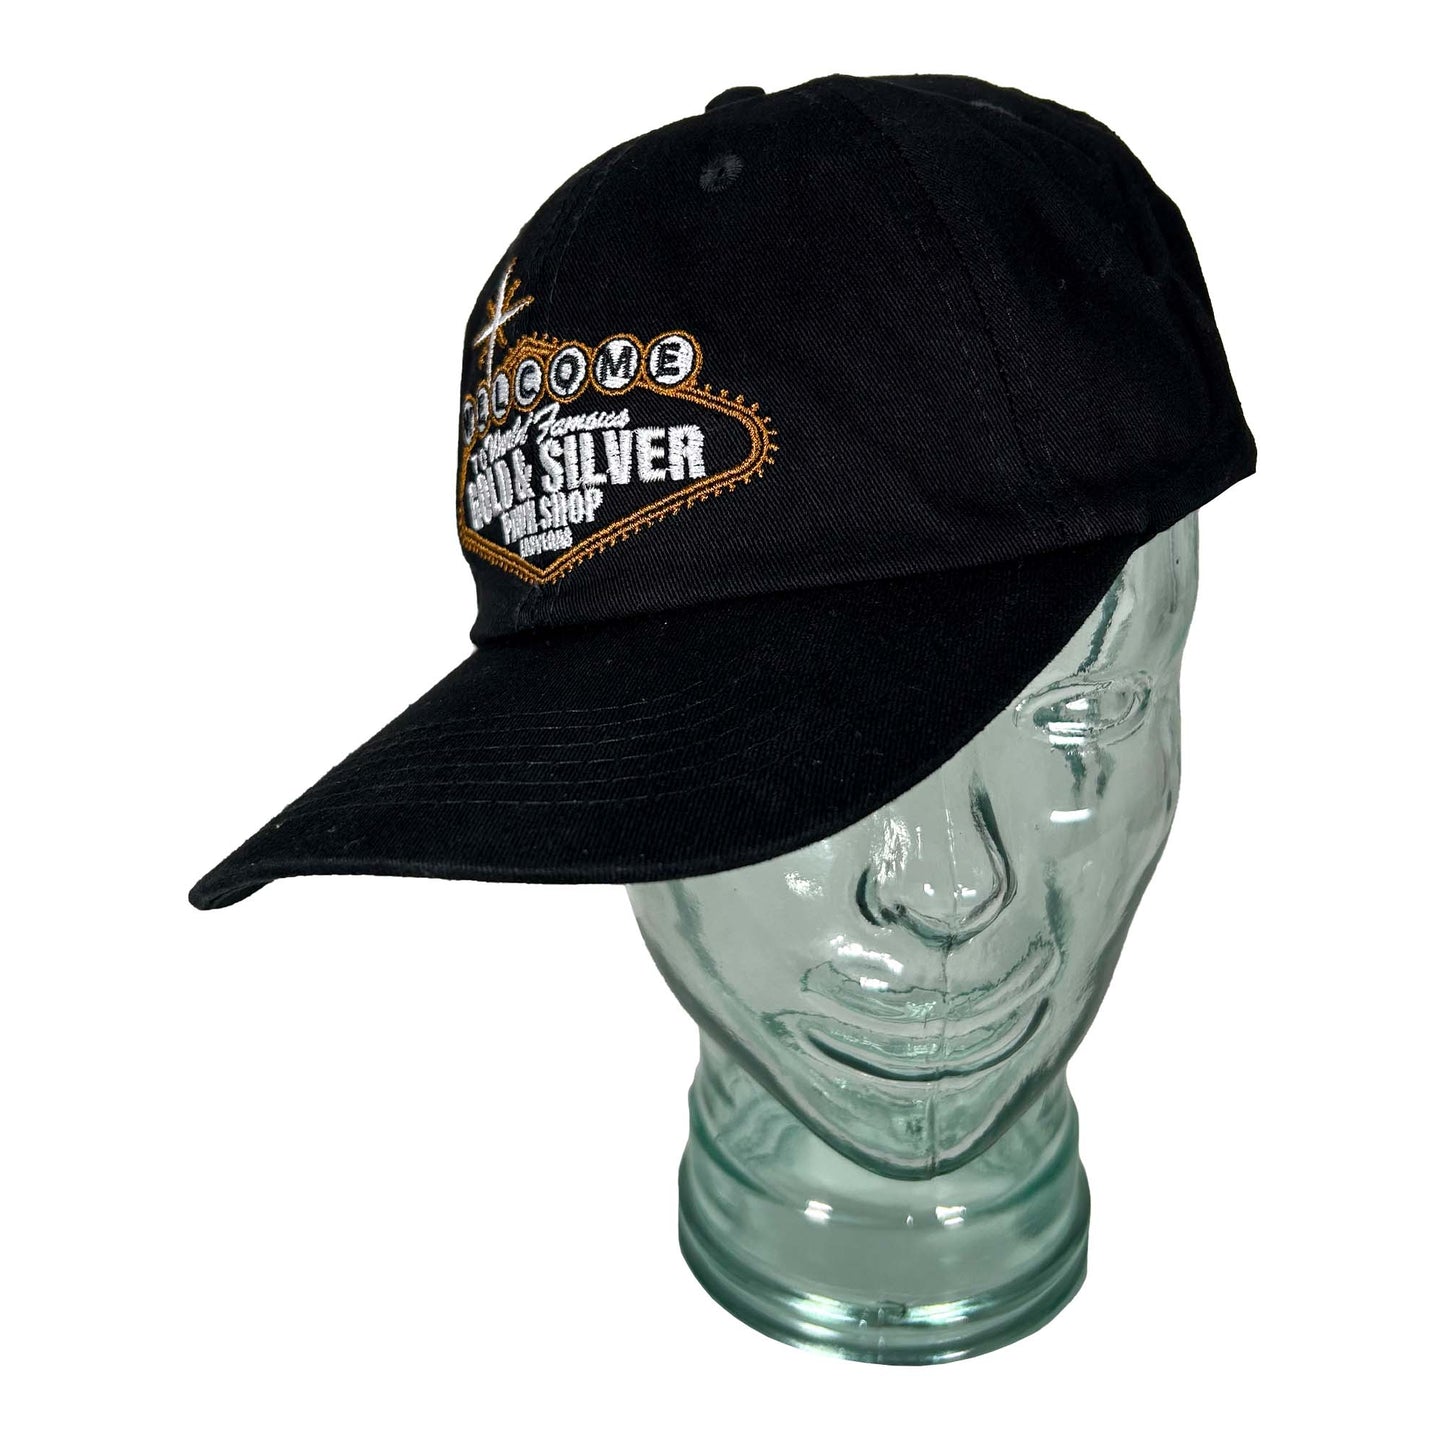 Worlds Famous Gold & Silver Pawn Shop Hat Cool